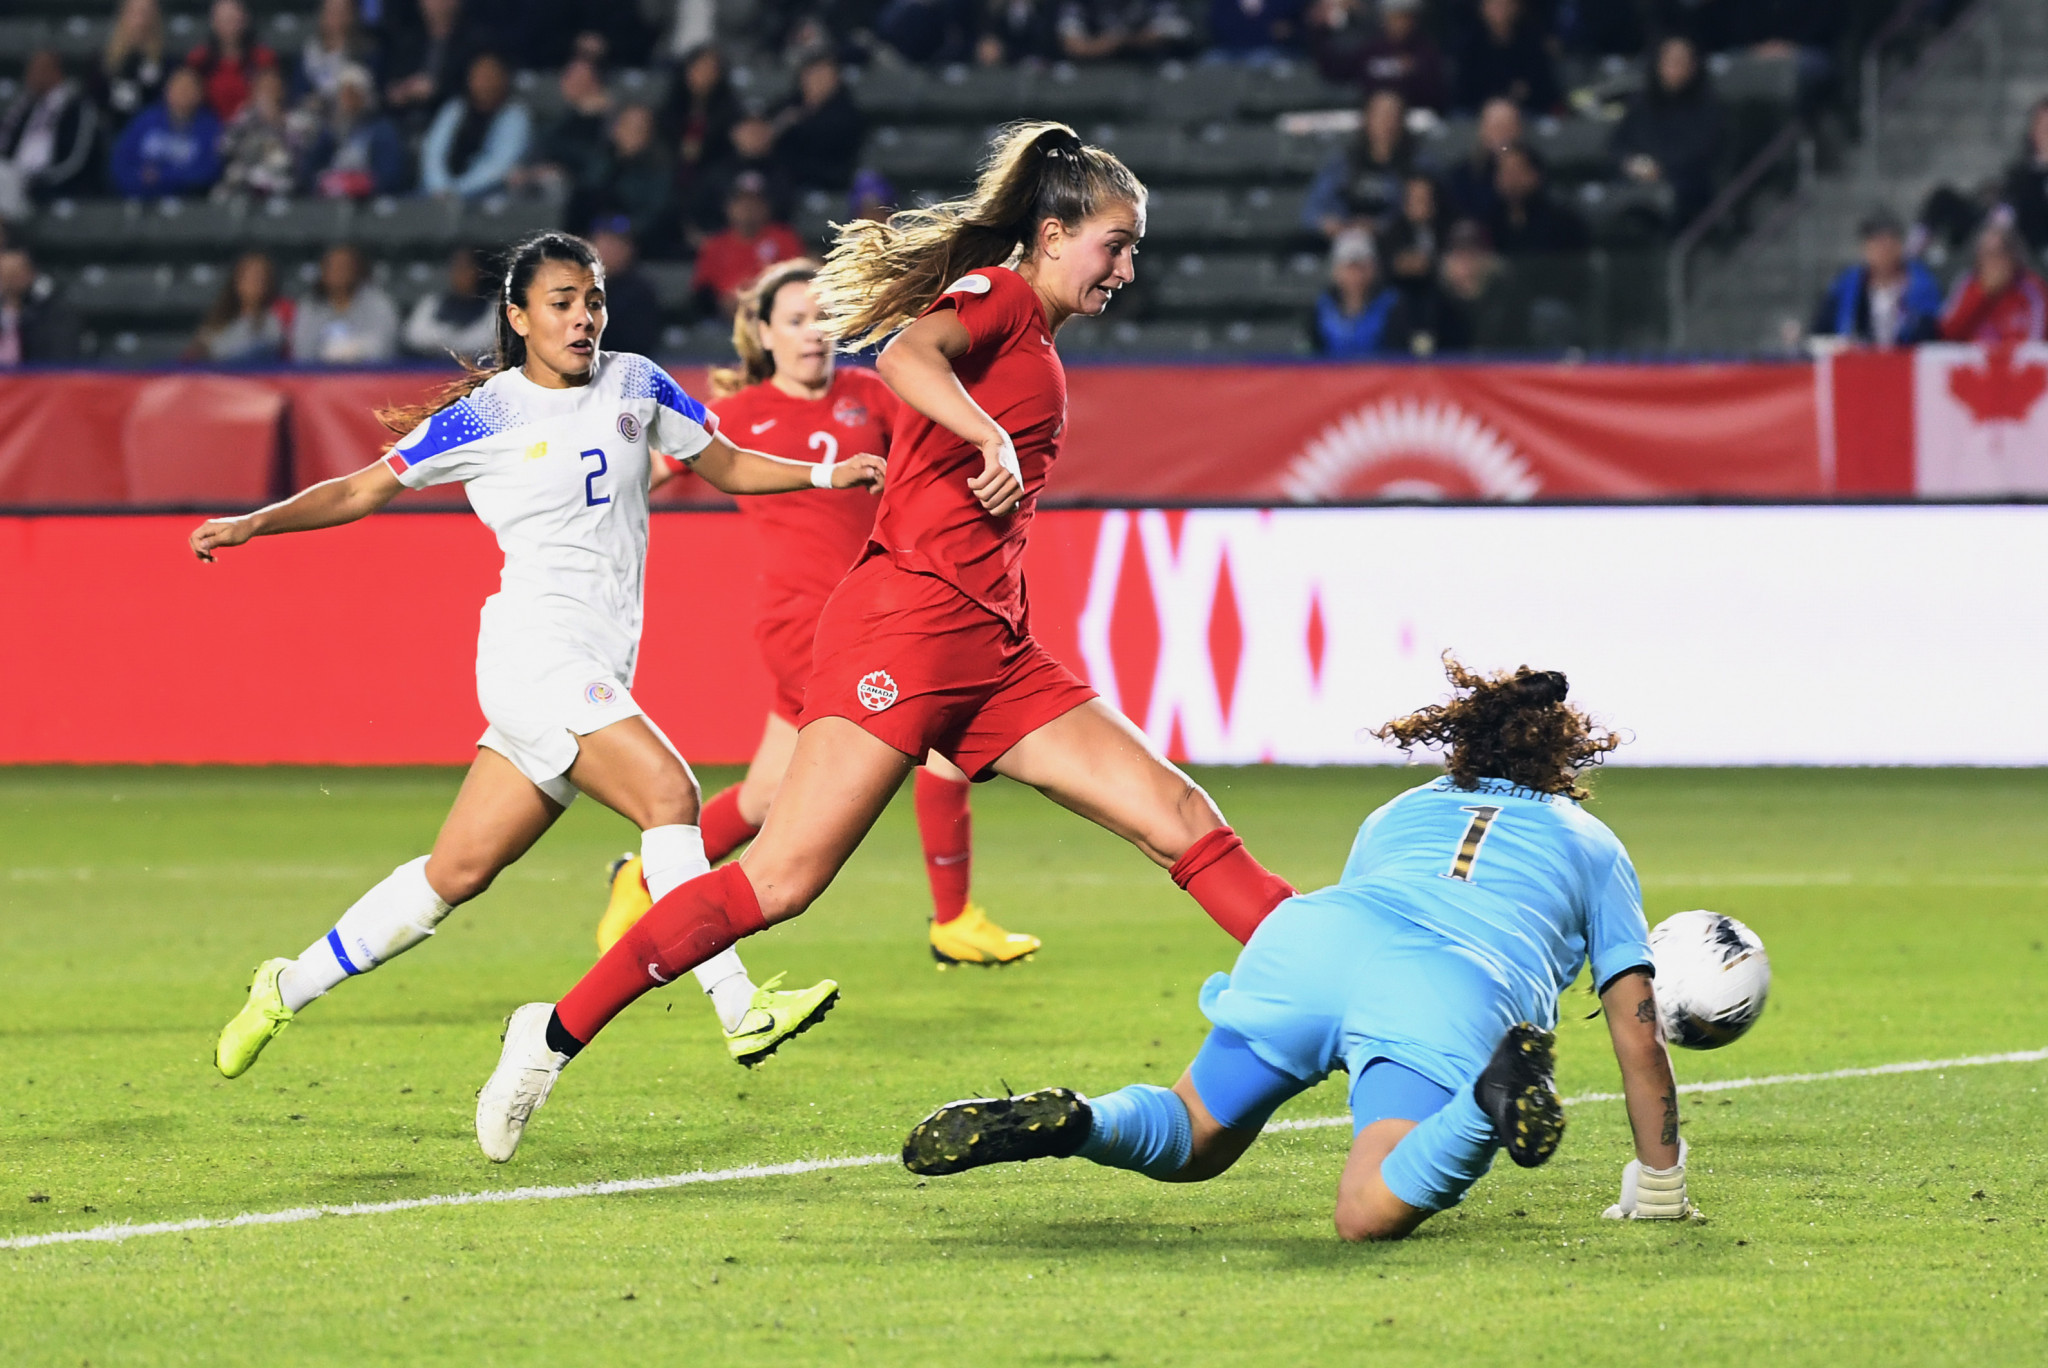 Jordyn Huitema scored Canada's only goal in their victory against Costa Rica ©Getty Images